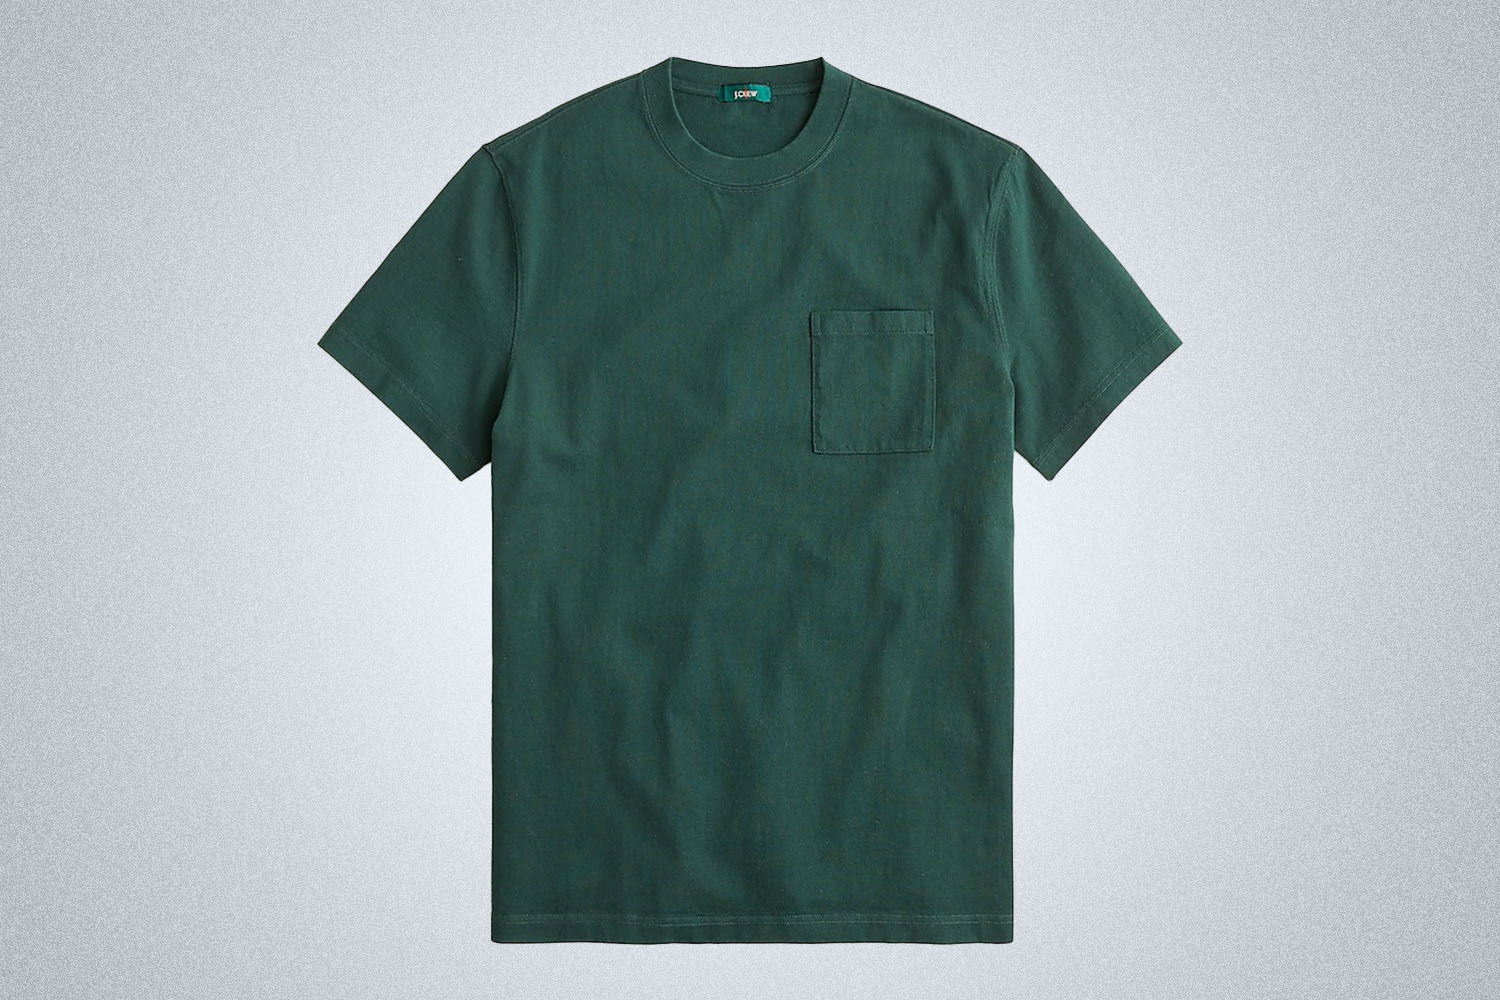 a green relaxed fit tee from J.Crew on a grey background